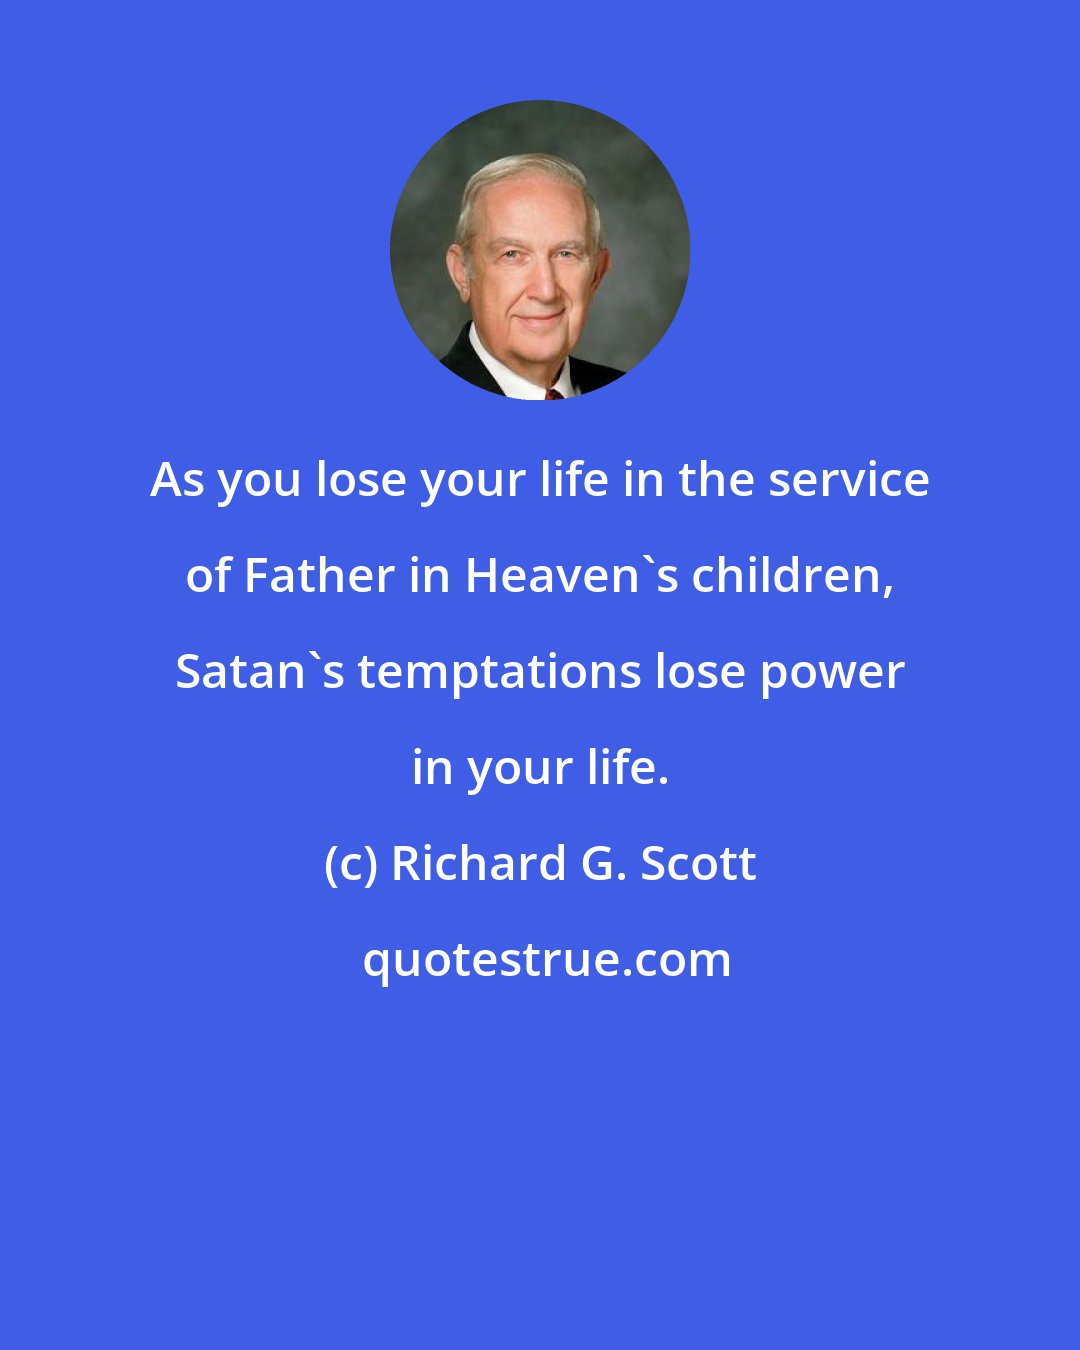 Richard G. Scott: As you lose your life in the service of Father in Heaven's children, Satan's temptations lose power in your life.